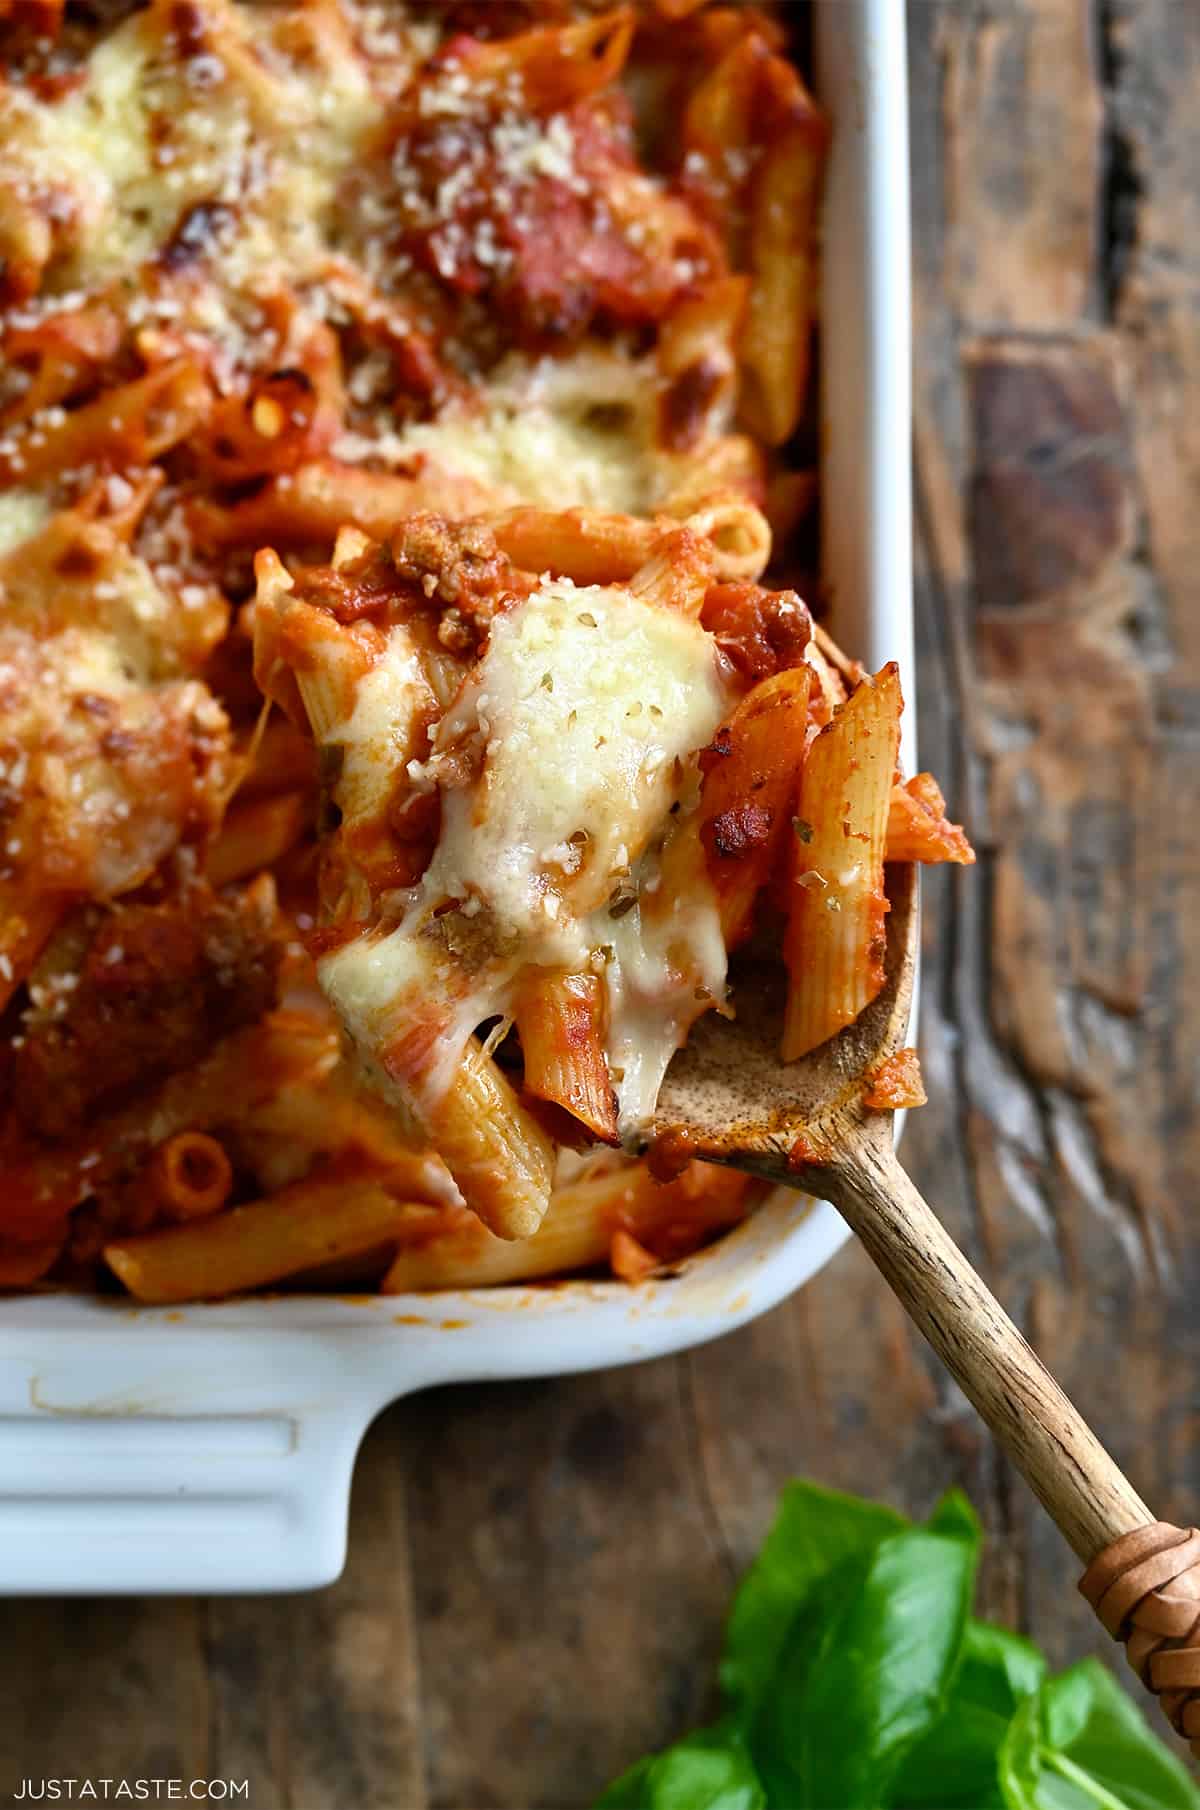 A spoon with baked penne pasta and gooey mozzarella cheese.